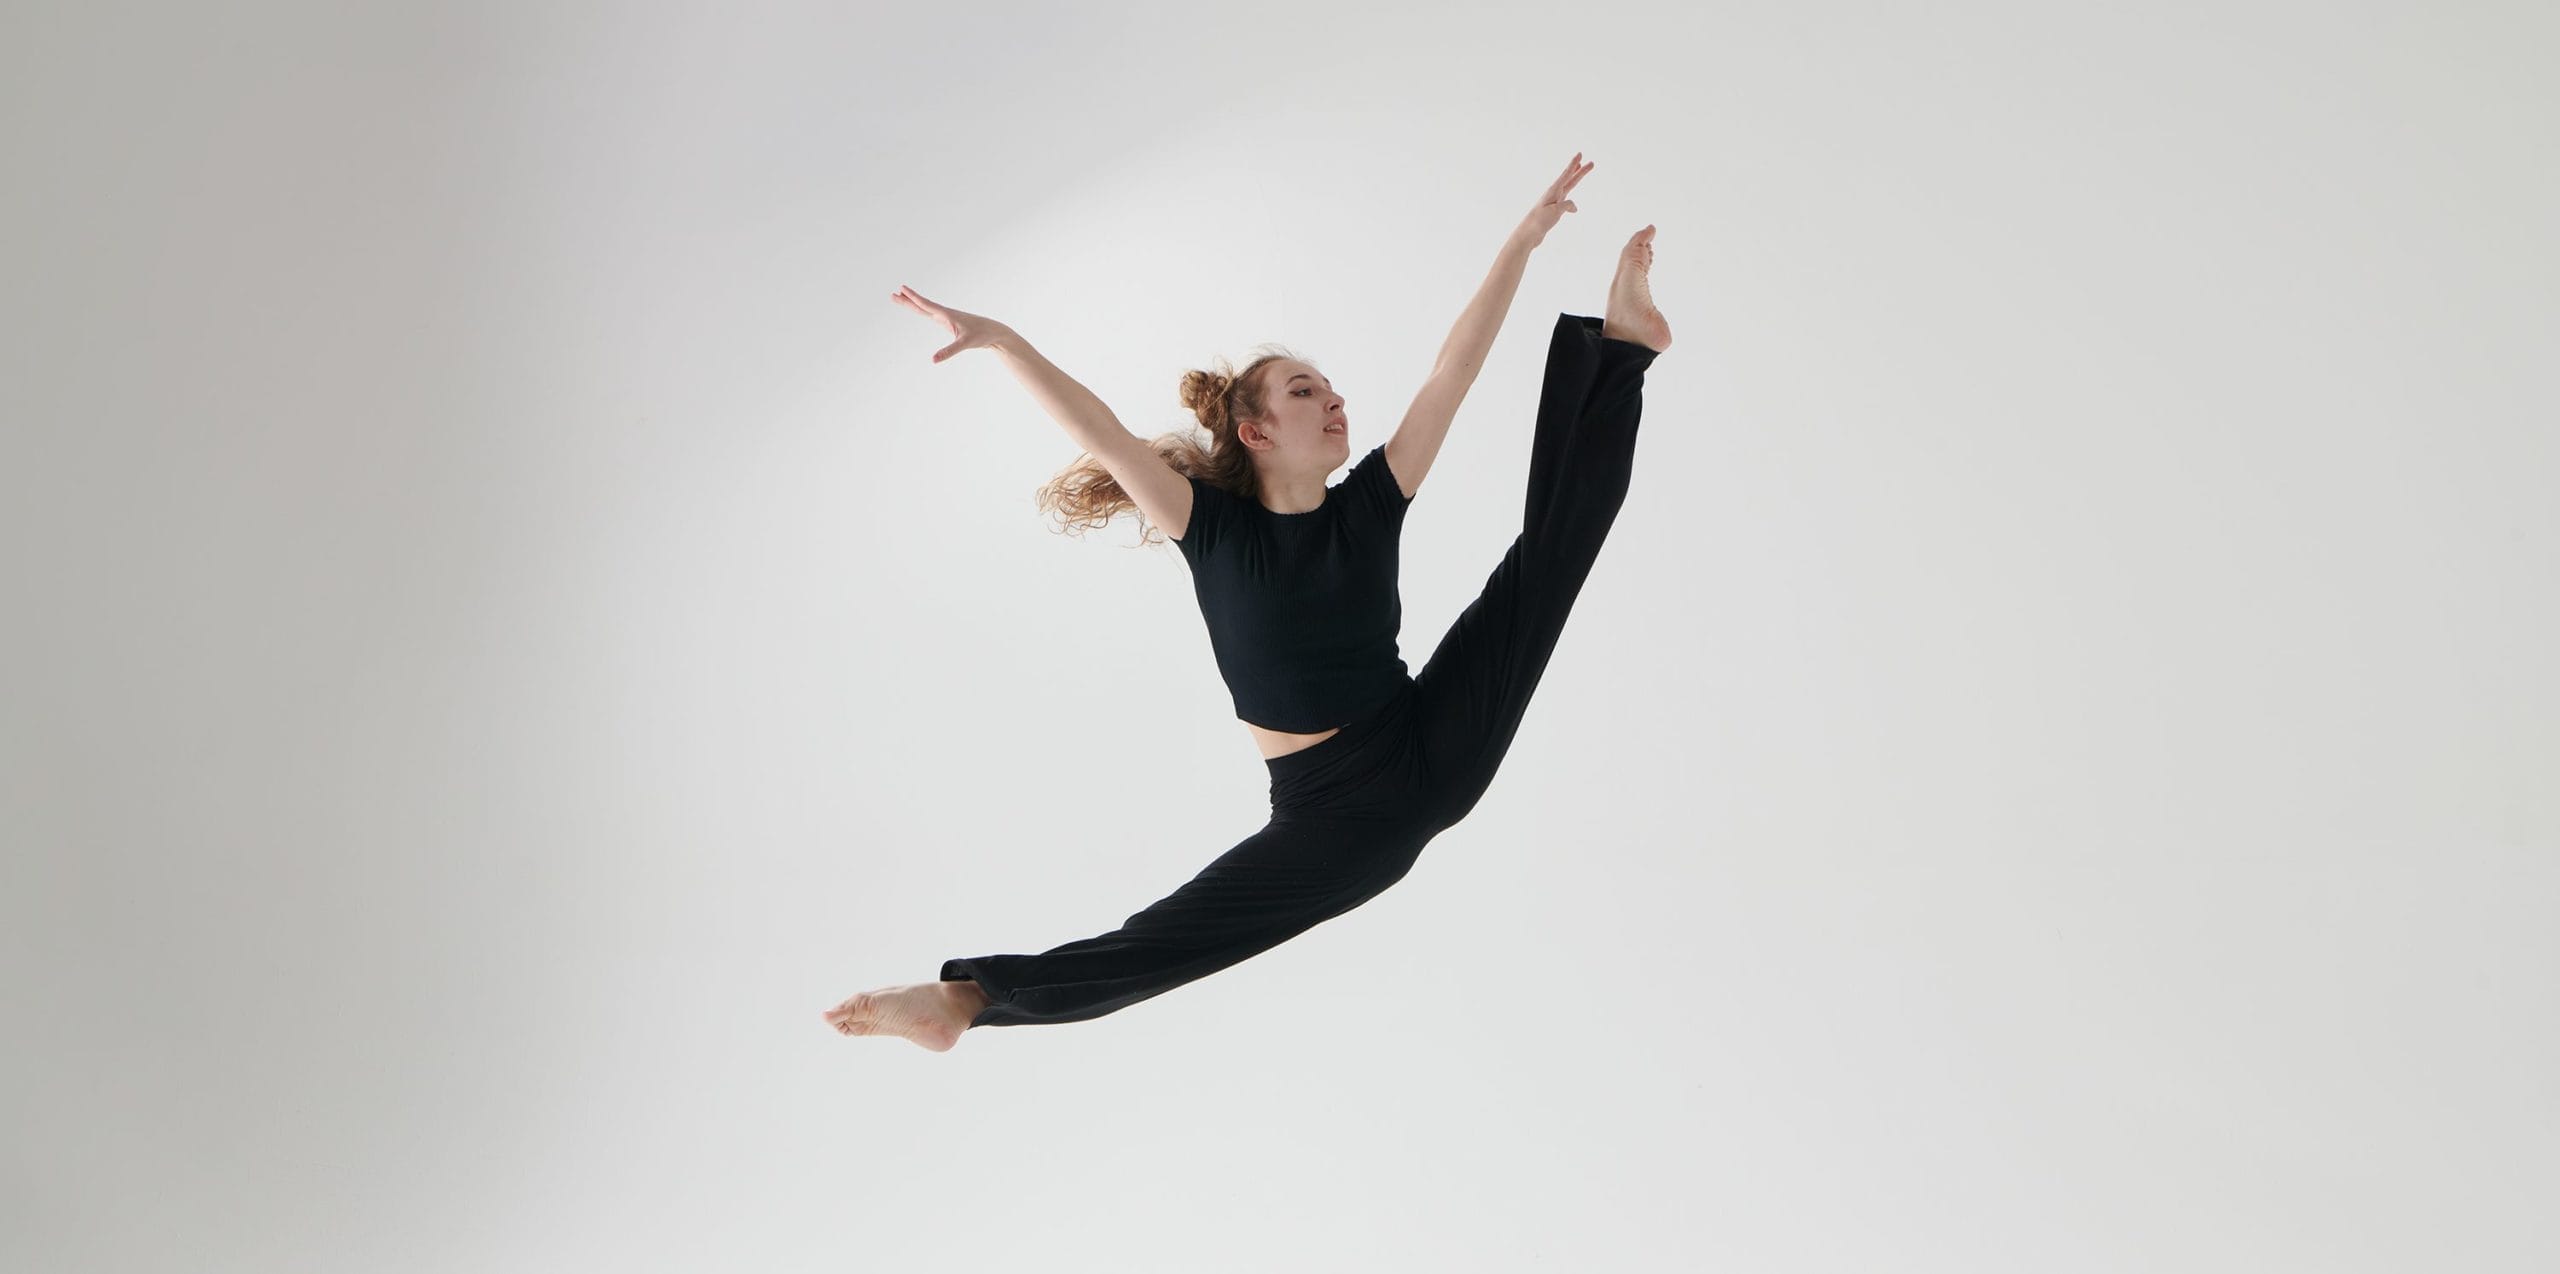 A blonde female dancer is photographed against a white background. She is leaping into an impressive oversplit, with pointed feet and arms in the air. She is wearing a black t-shirt and black trousers.